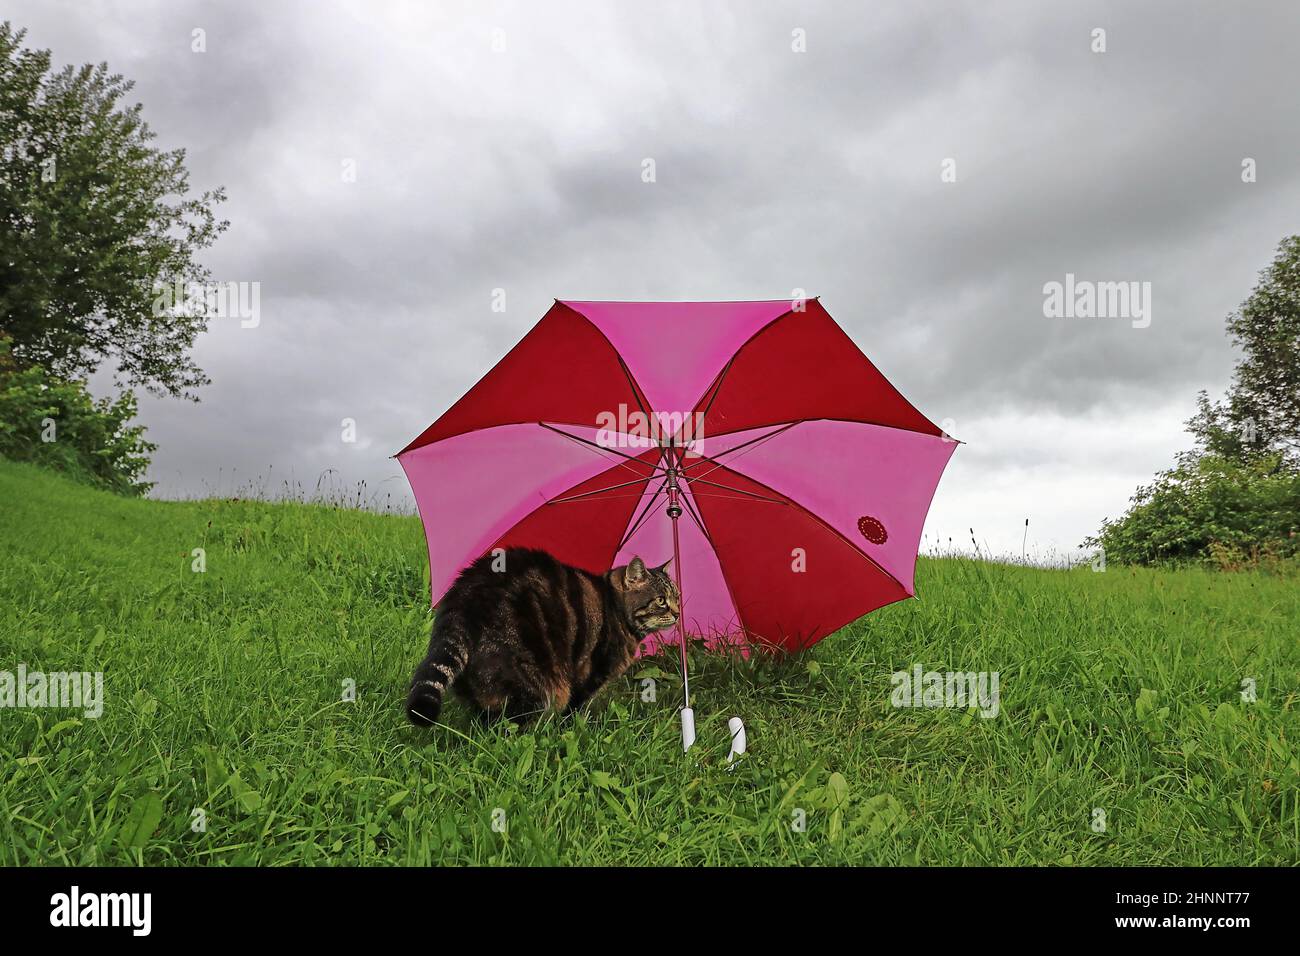 A cat sits under an umbrella in rainy weather Stock Photo